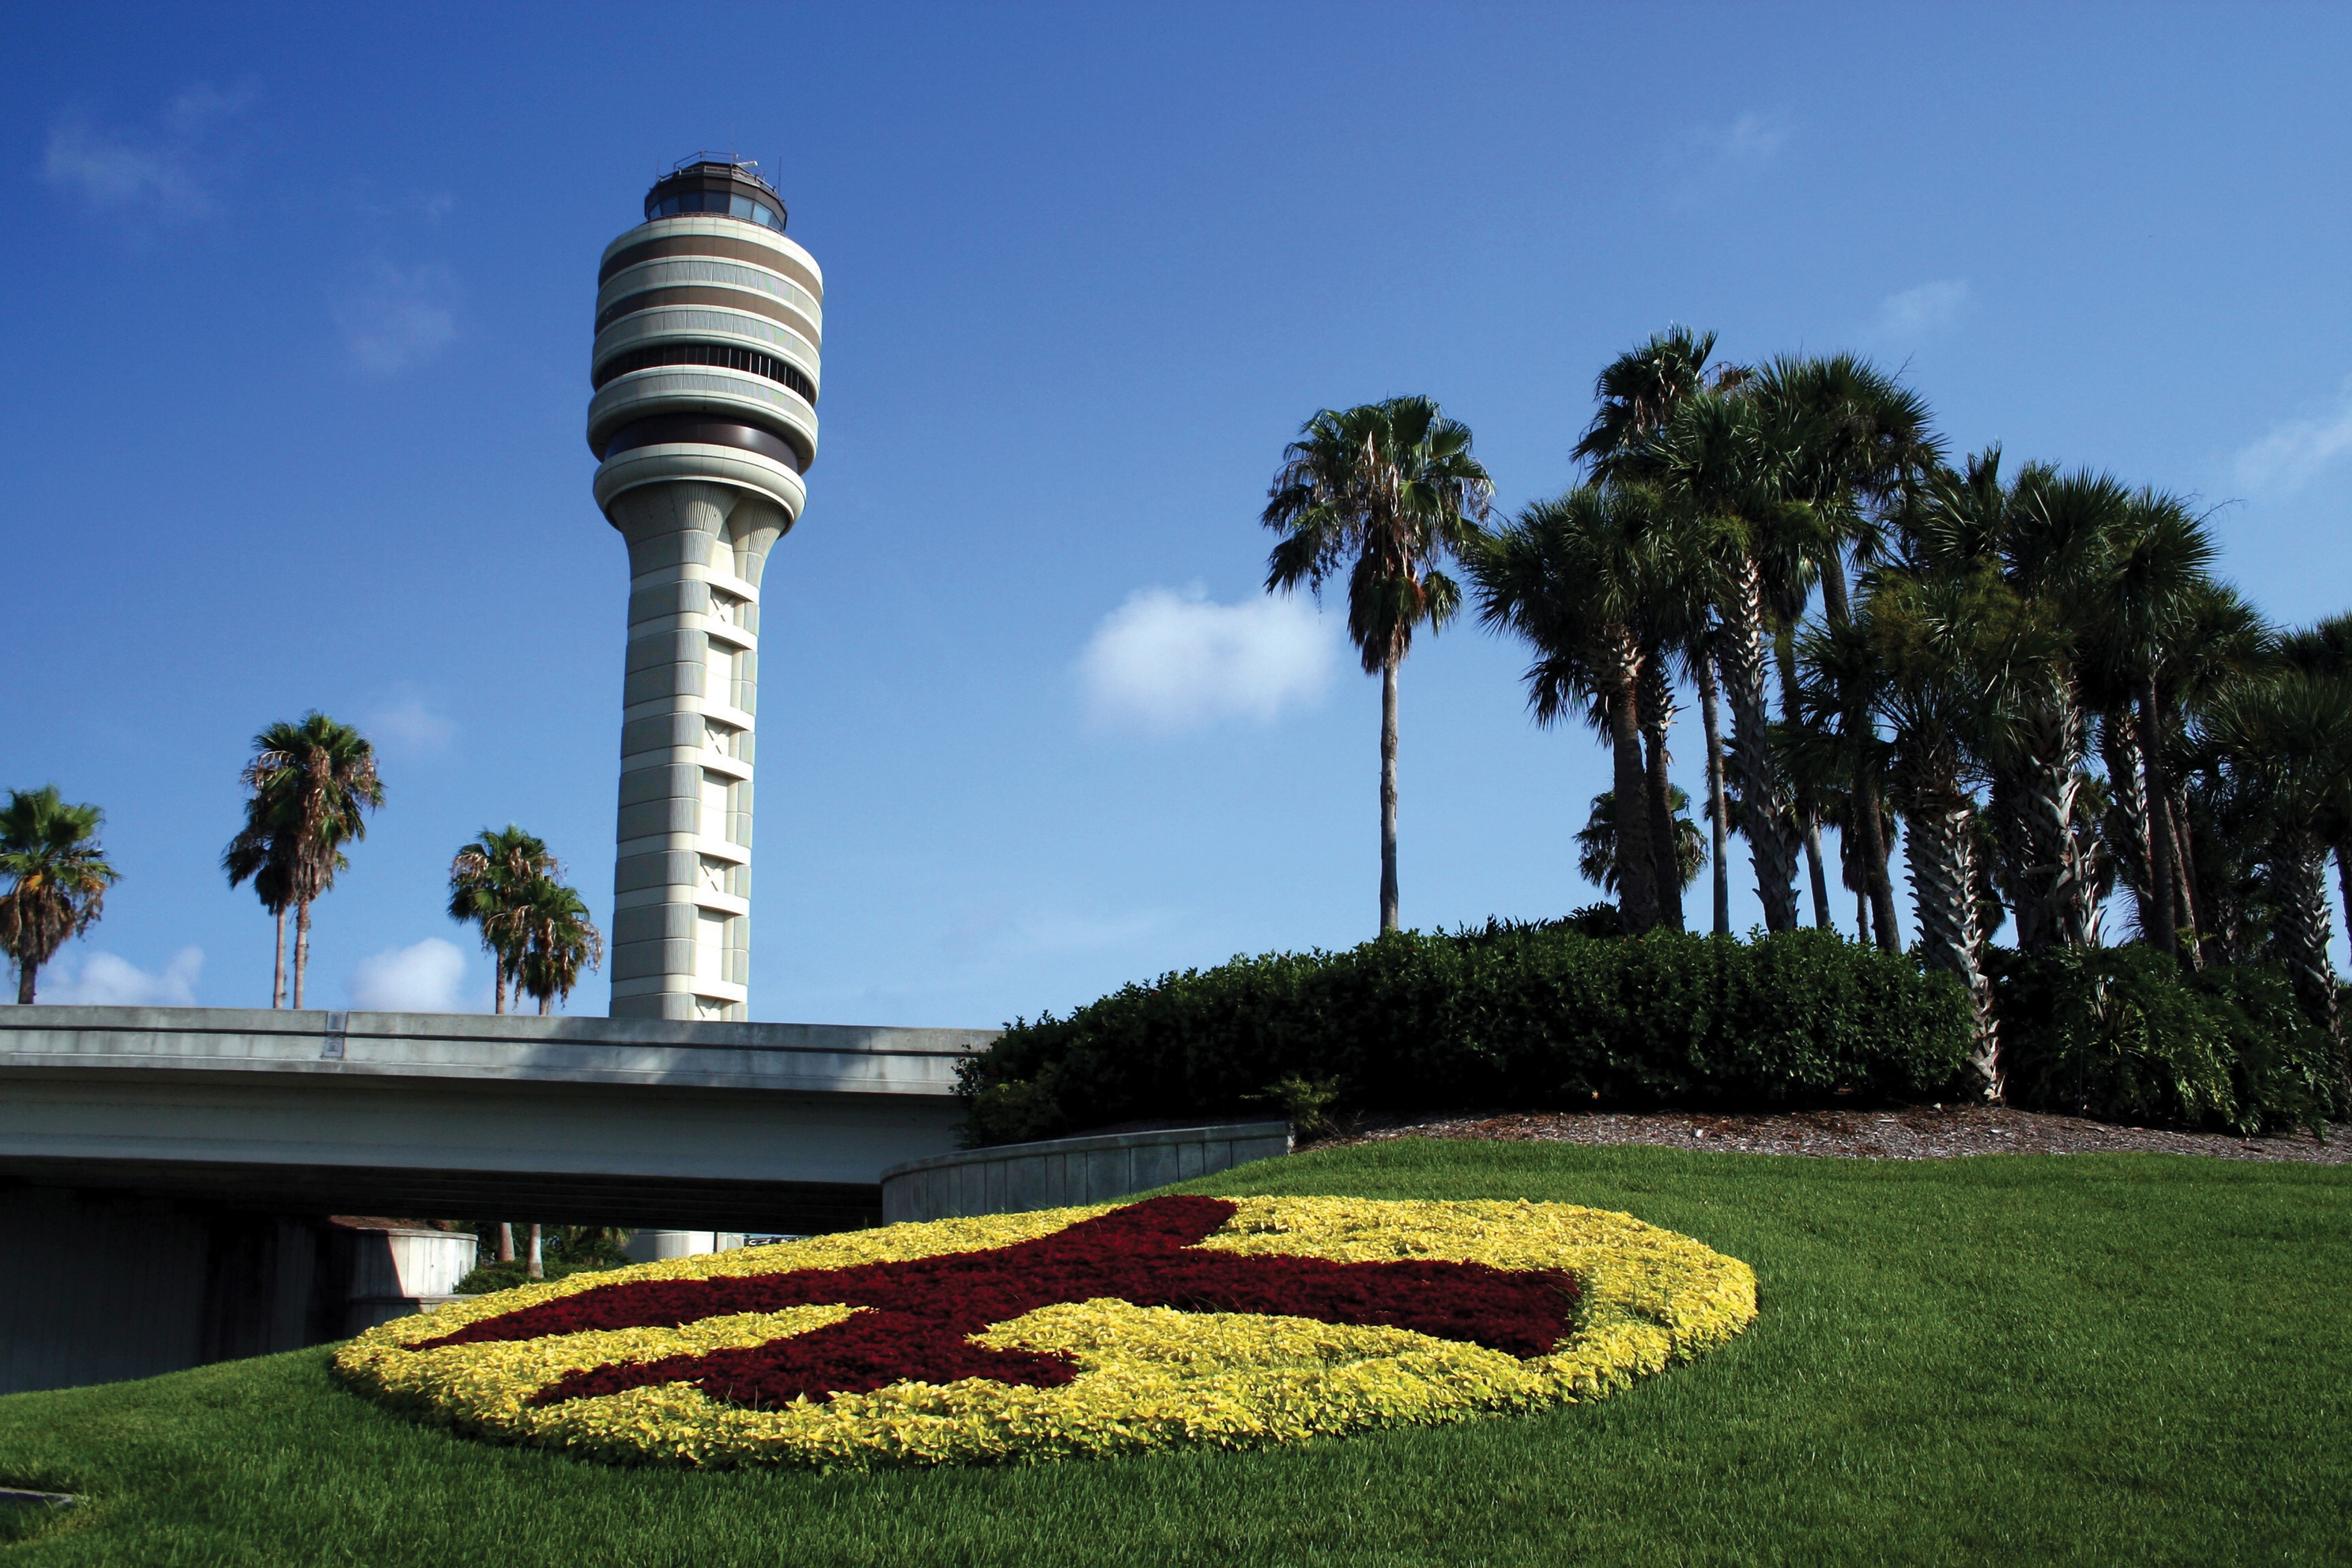 FAA Tower with Flowerbed